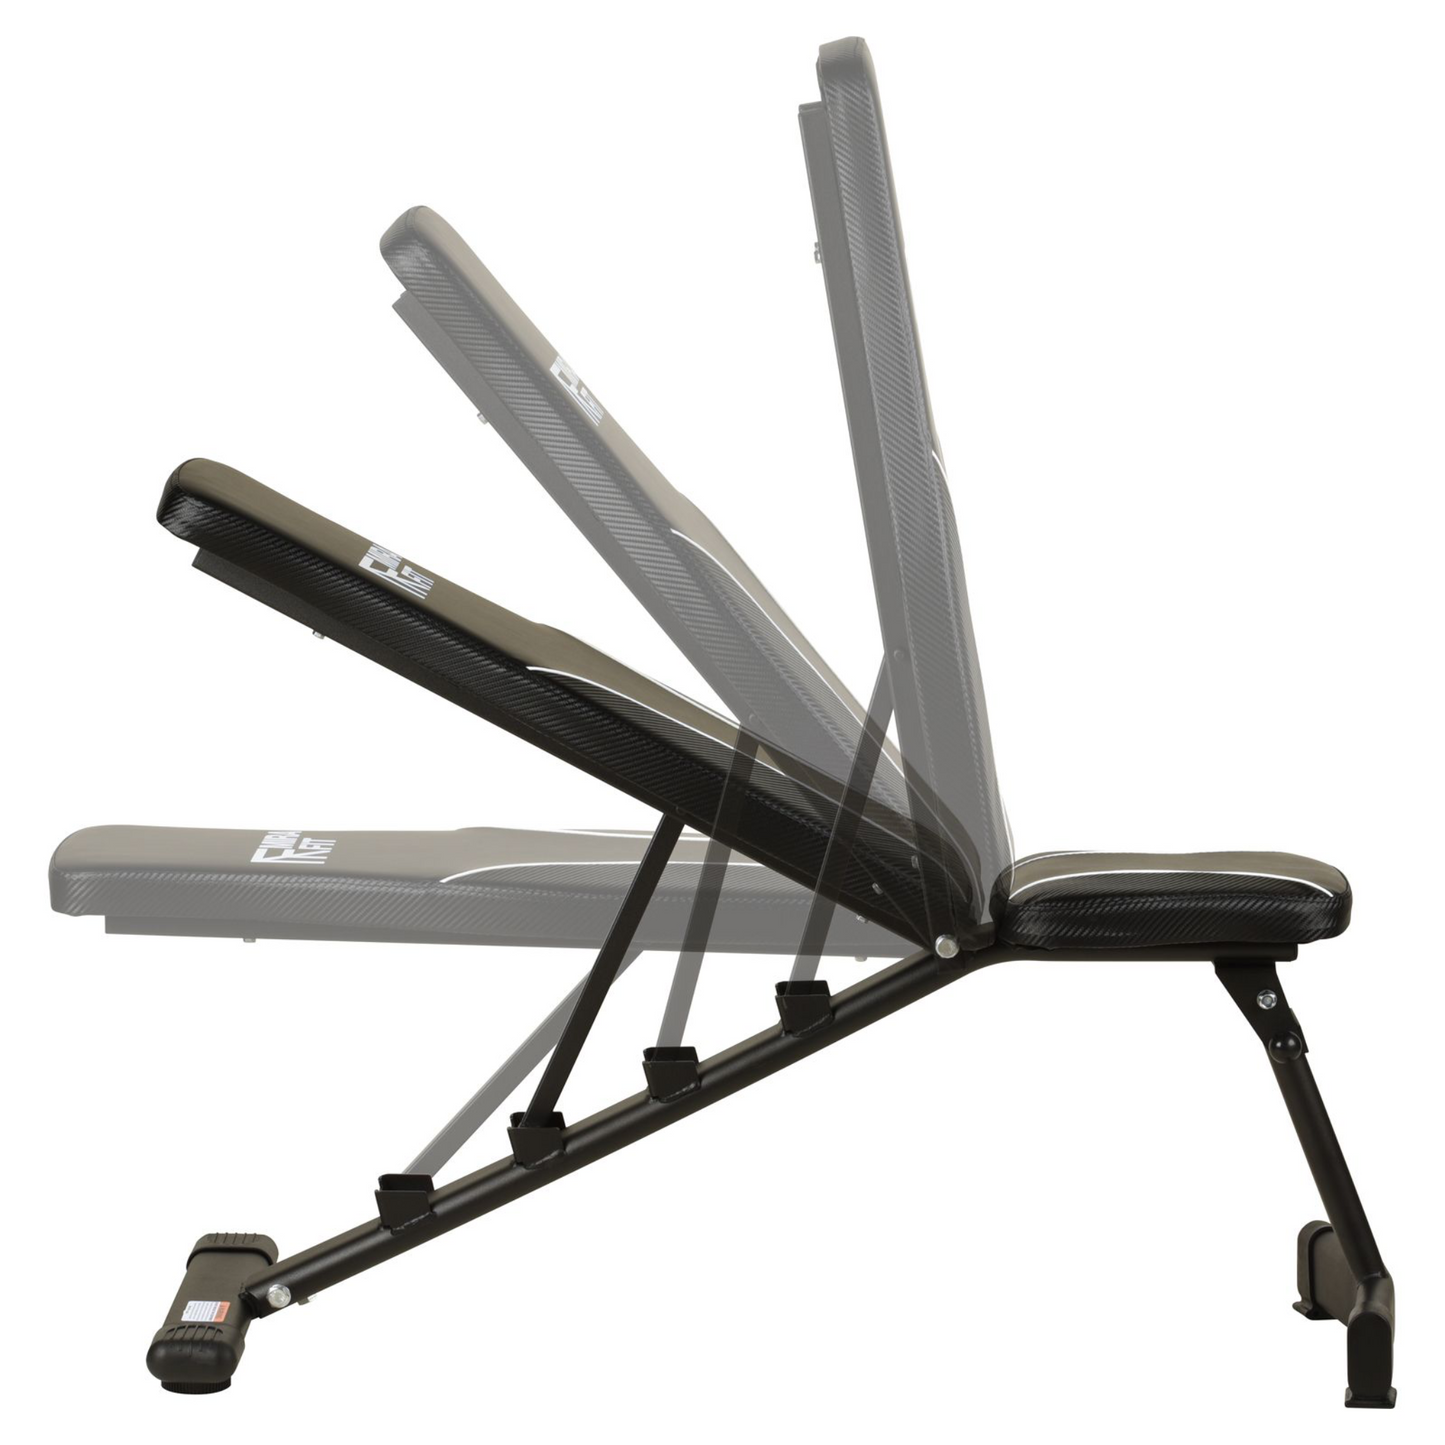 Mirafit Folding Home Gym Bench With Dumbbells & Storage Rack